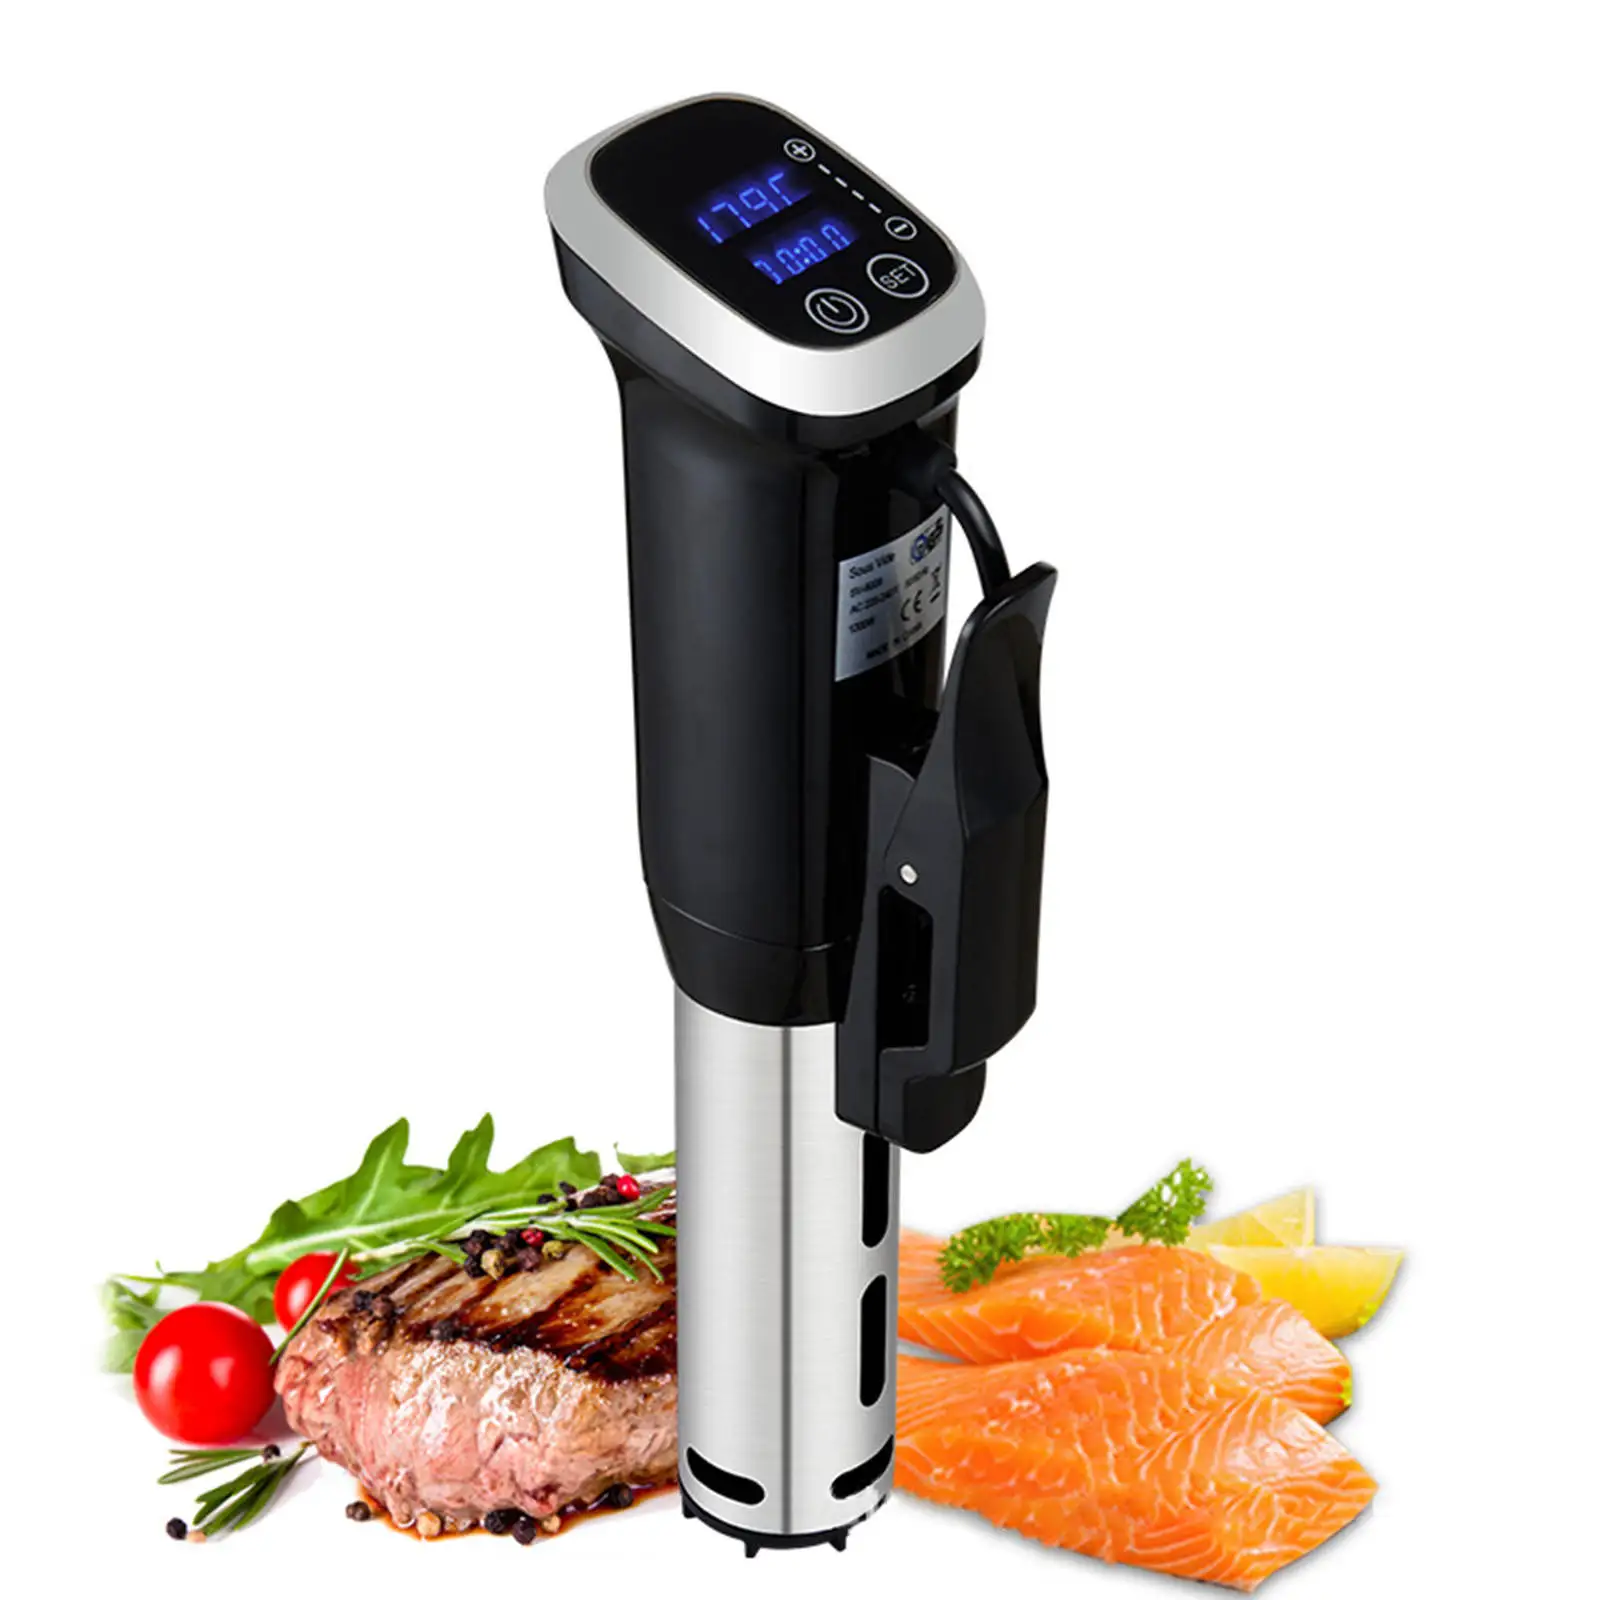 Sous Vide Cooker Quiet Operation Immersion Circulator Accurate Temperature Sturdy LED Digital Display Thermal 1200 W for Kitchen